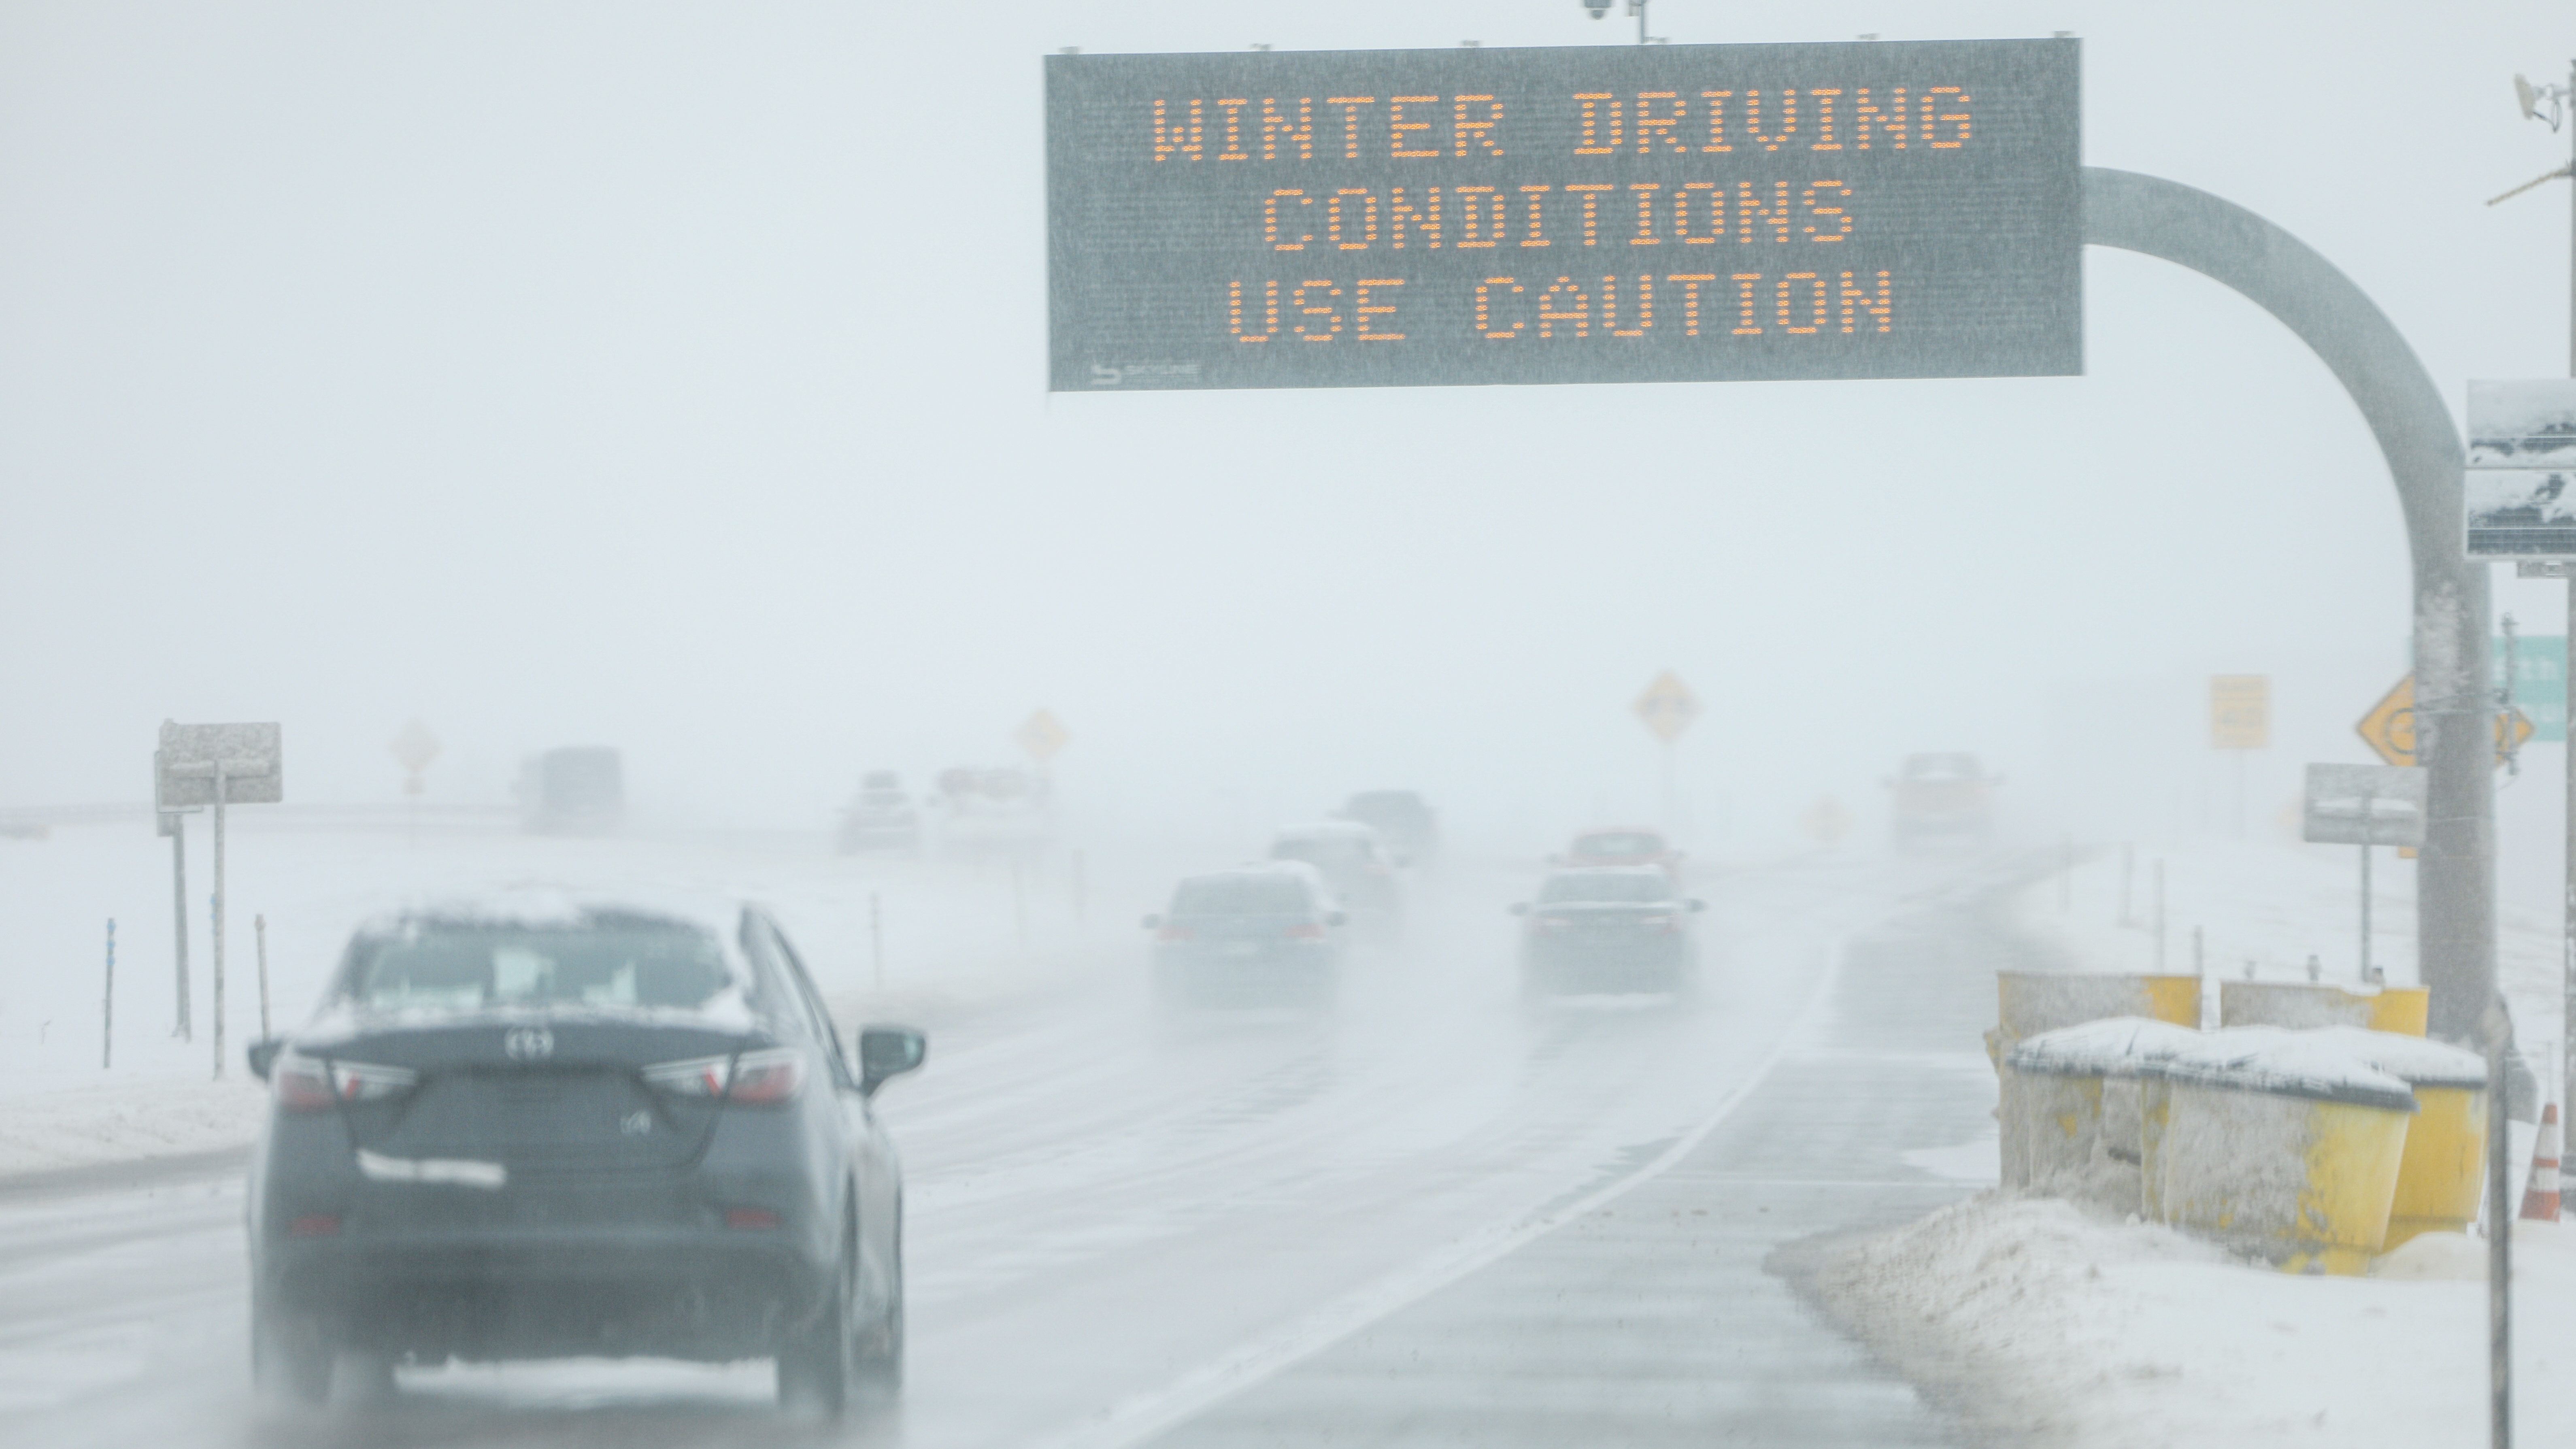 Drivers make their way along slick and snowy roads on Nov. 26, 2019 in Denver, Colorado. A strong w...